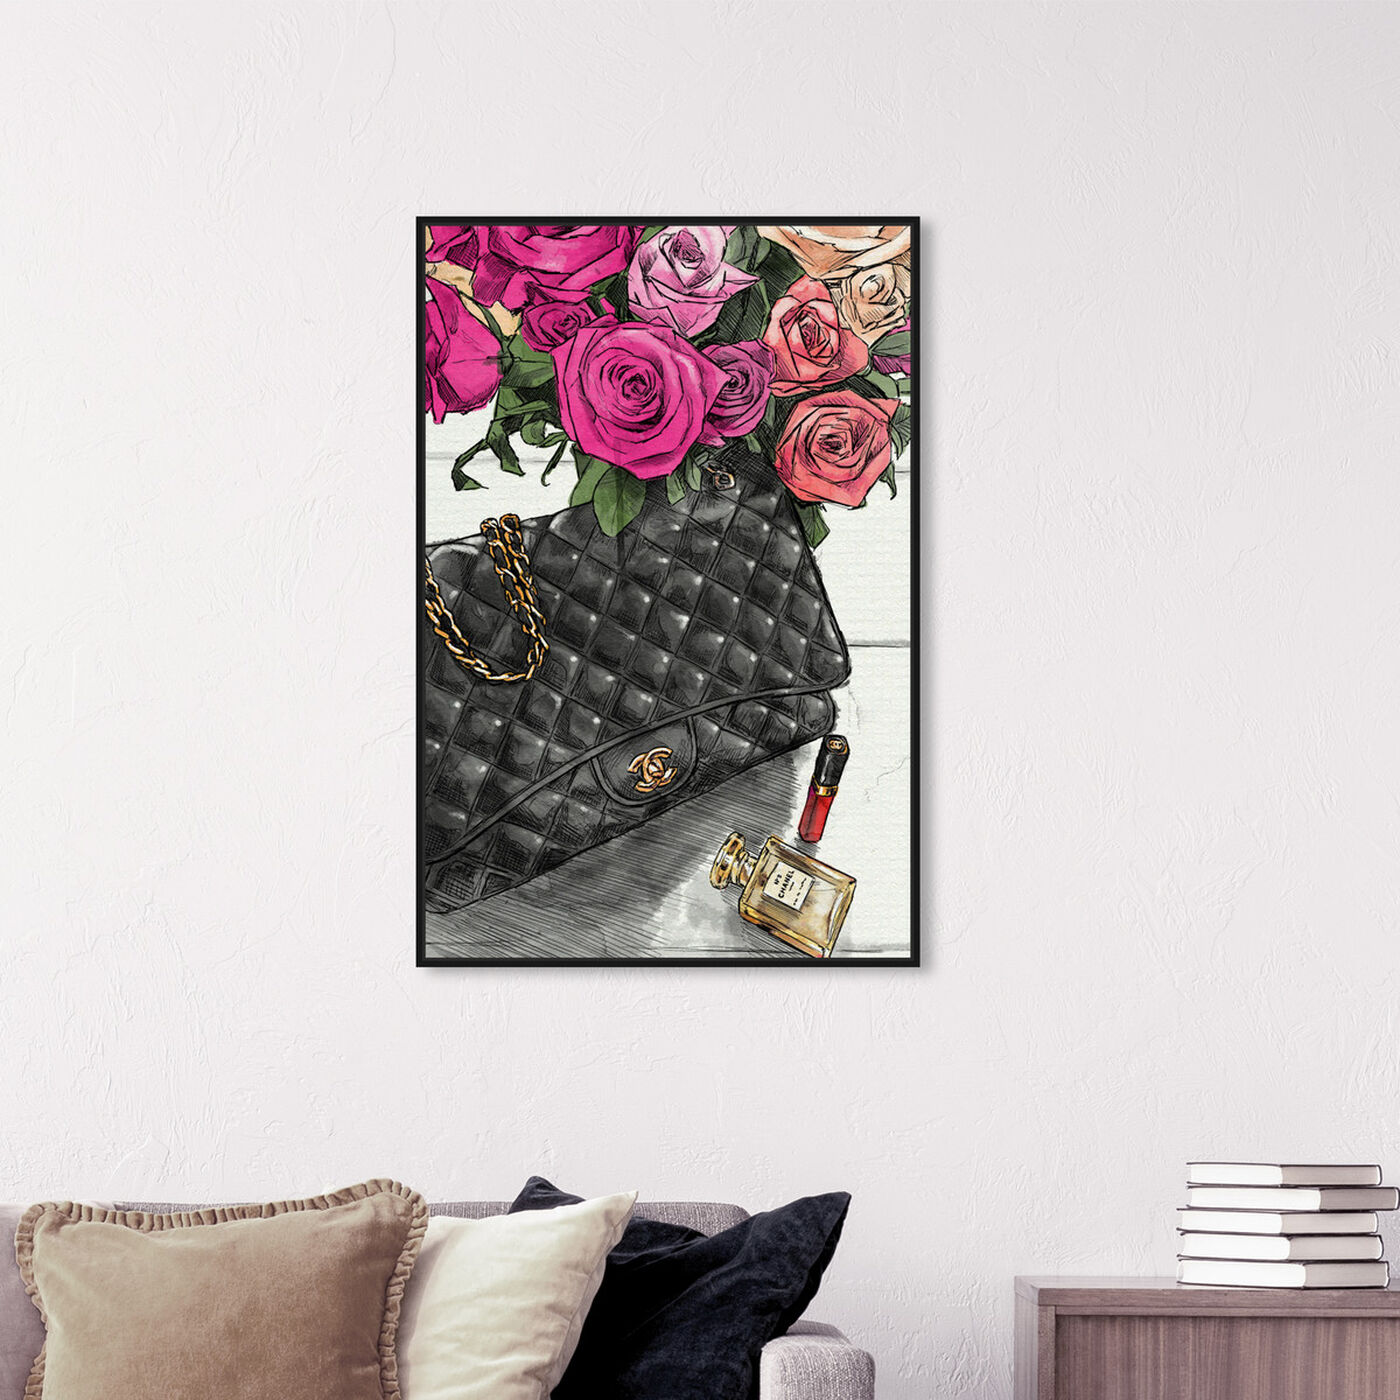 Hanging view of Fashionista's Favorites featuring fashion and glam and handbags art.